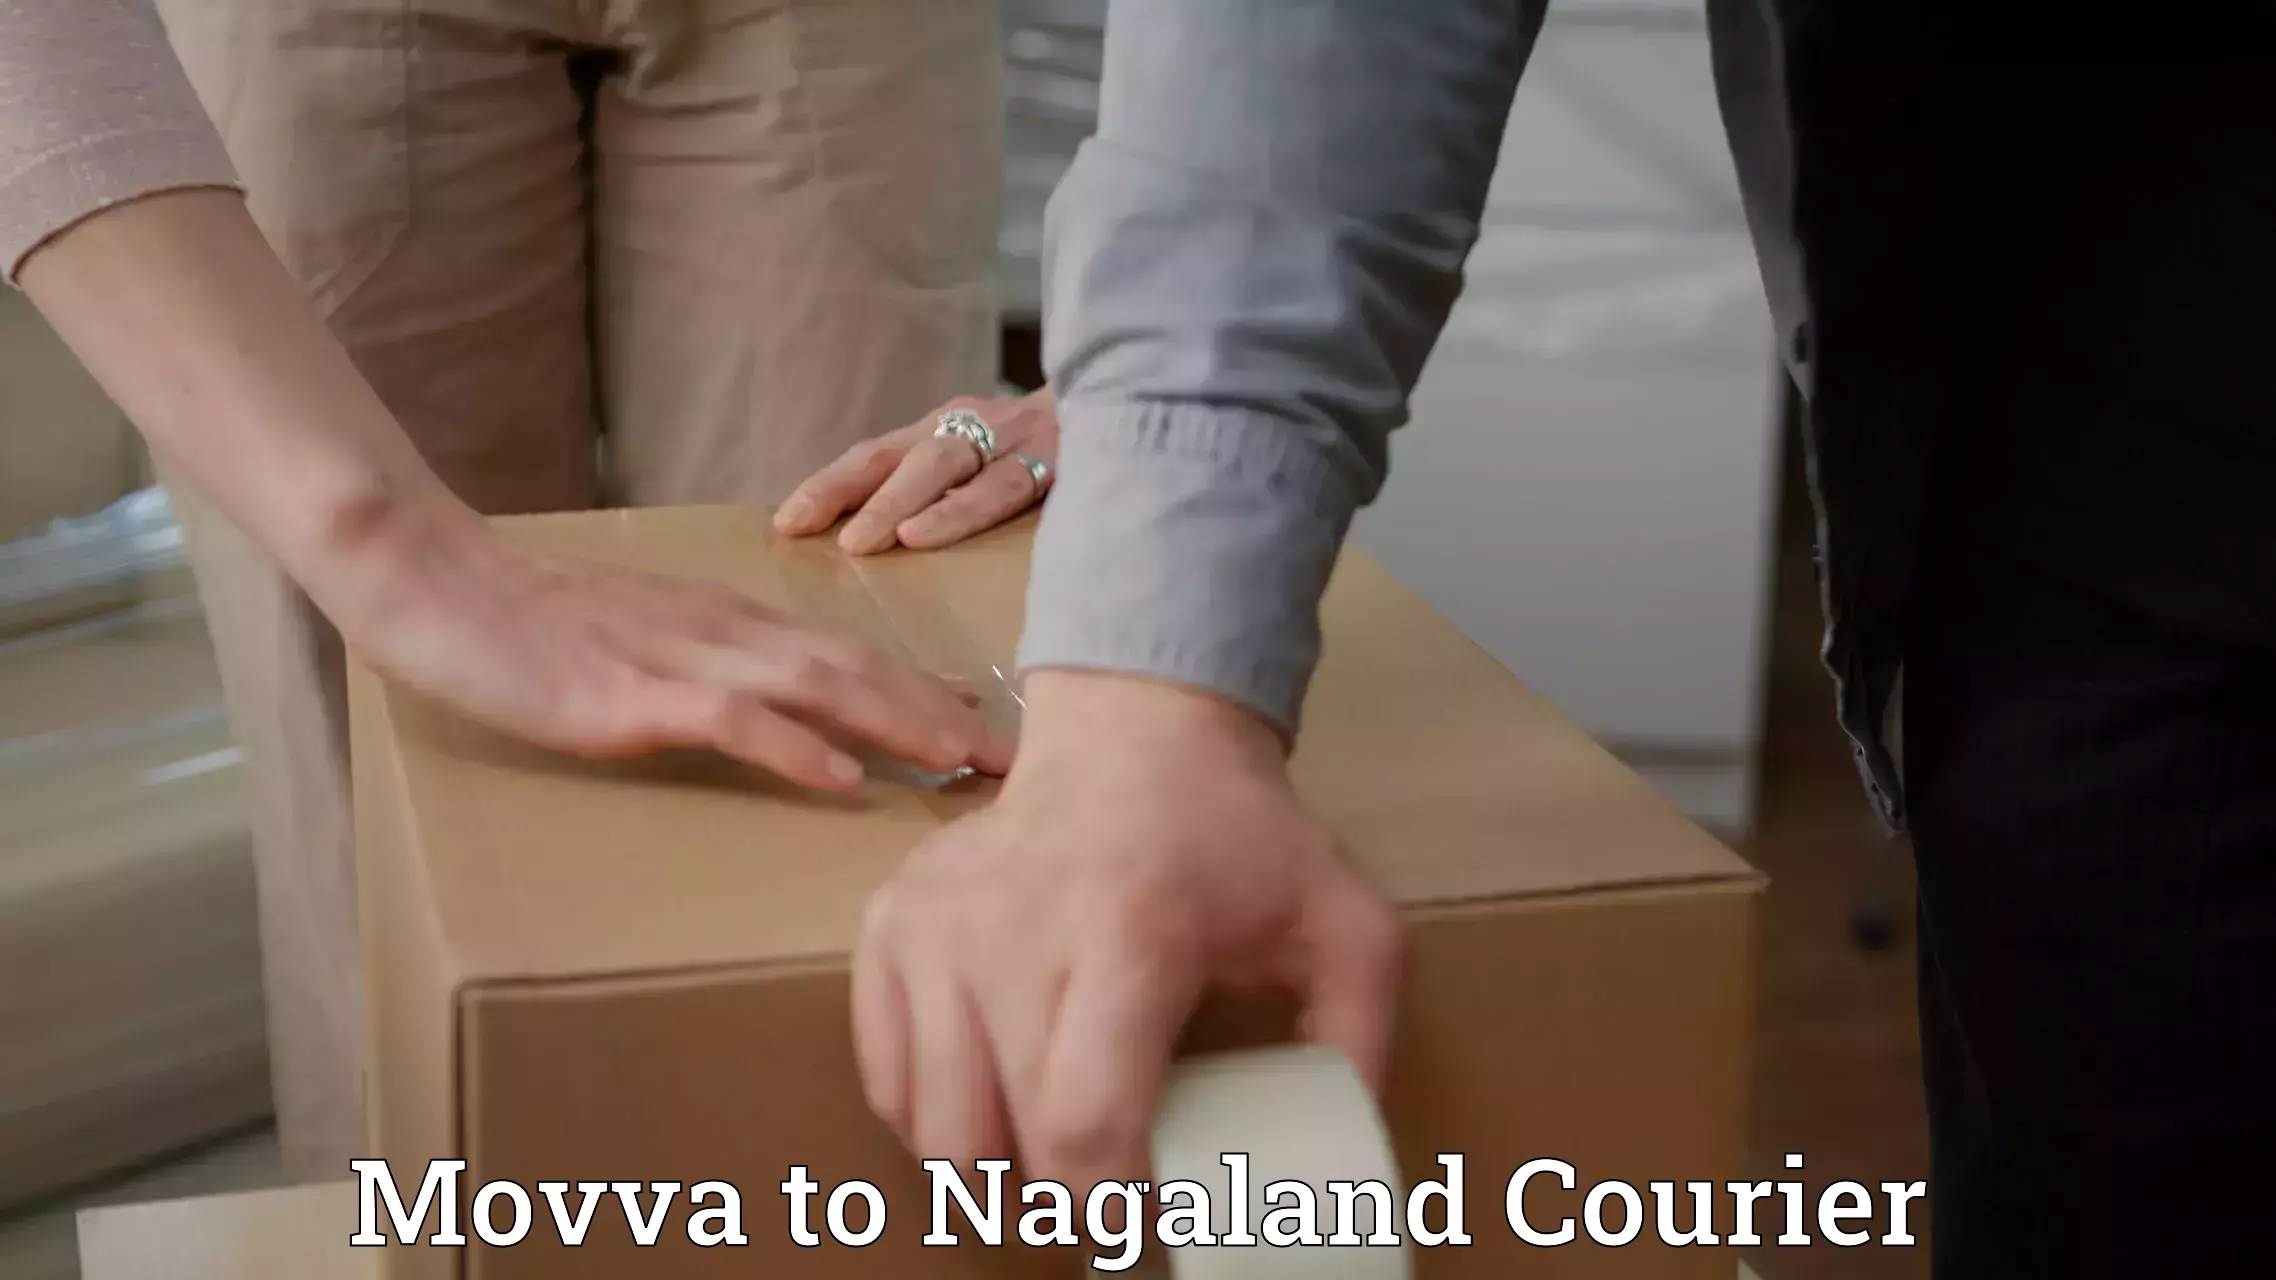 Customer-oriented courier services Movva to Nagaland